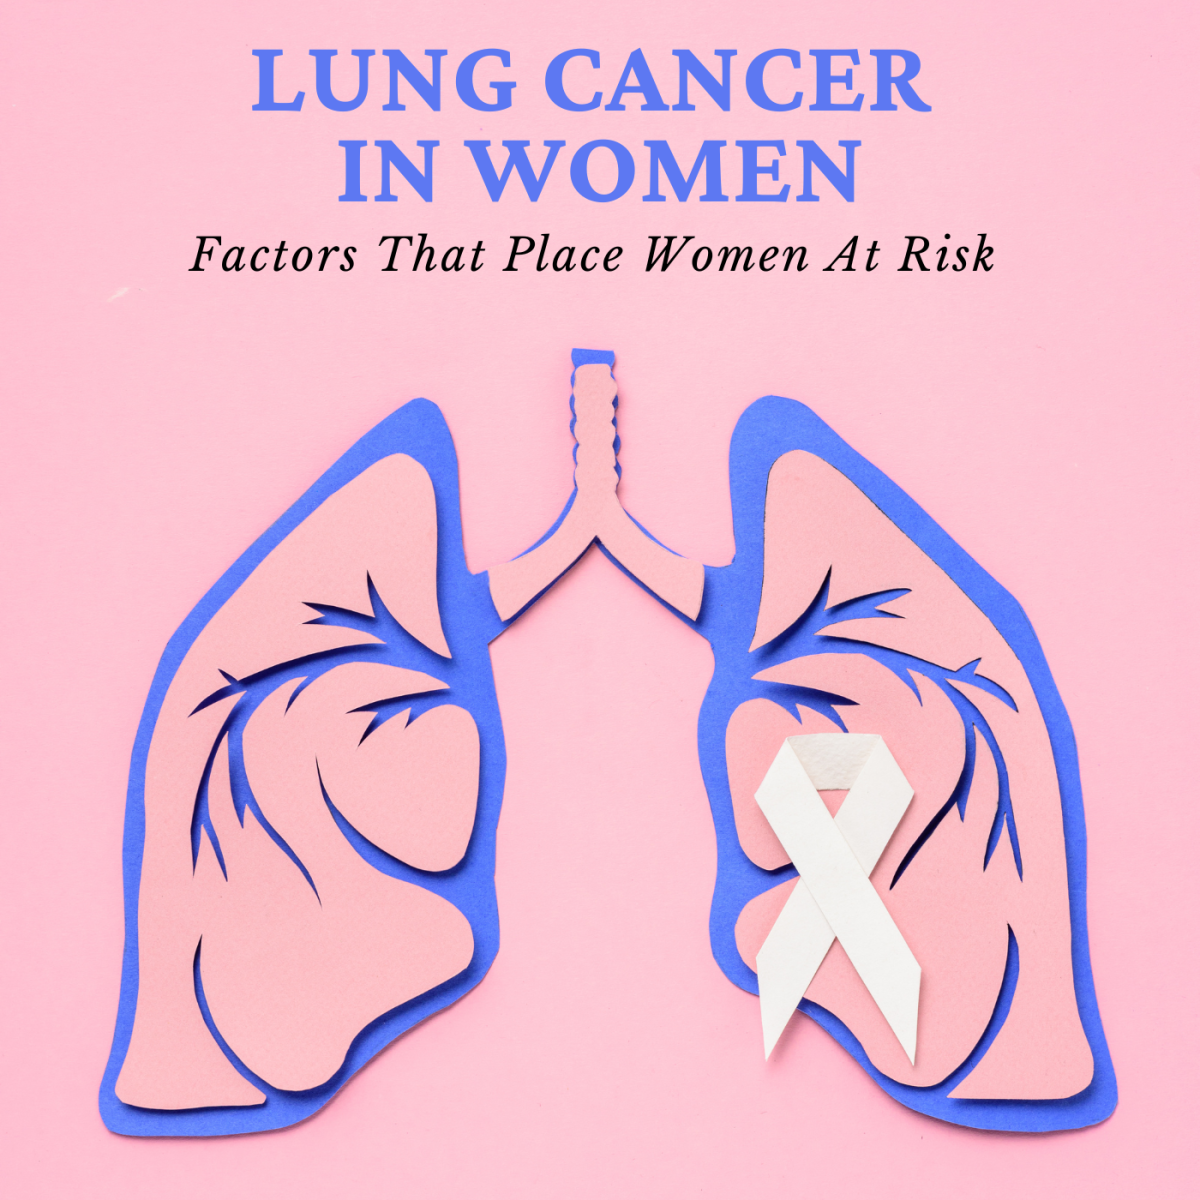 All about lung cancer prevalence among women